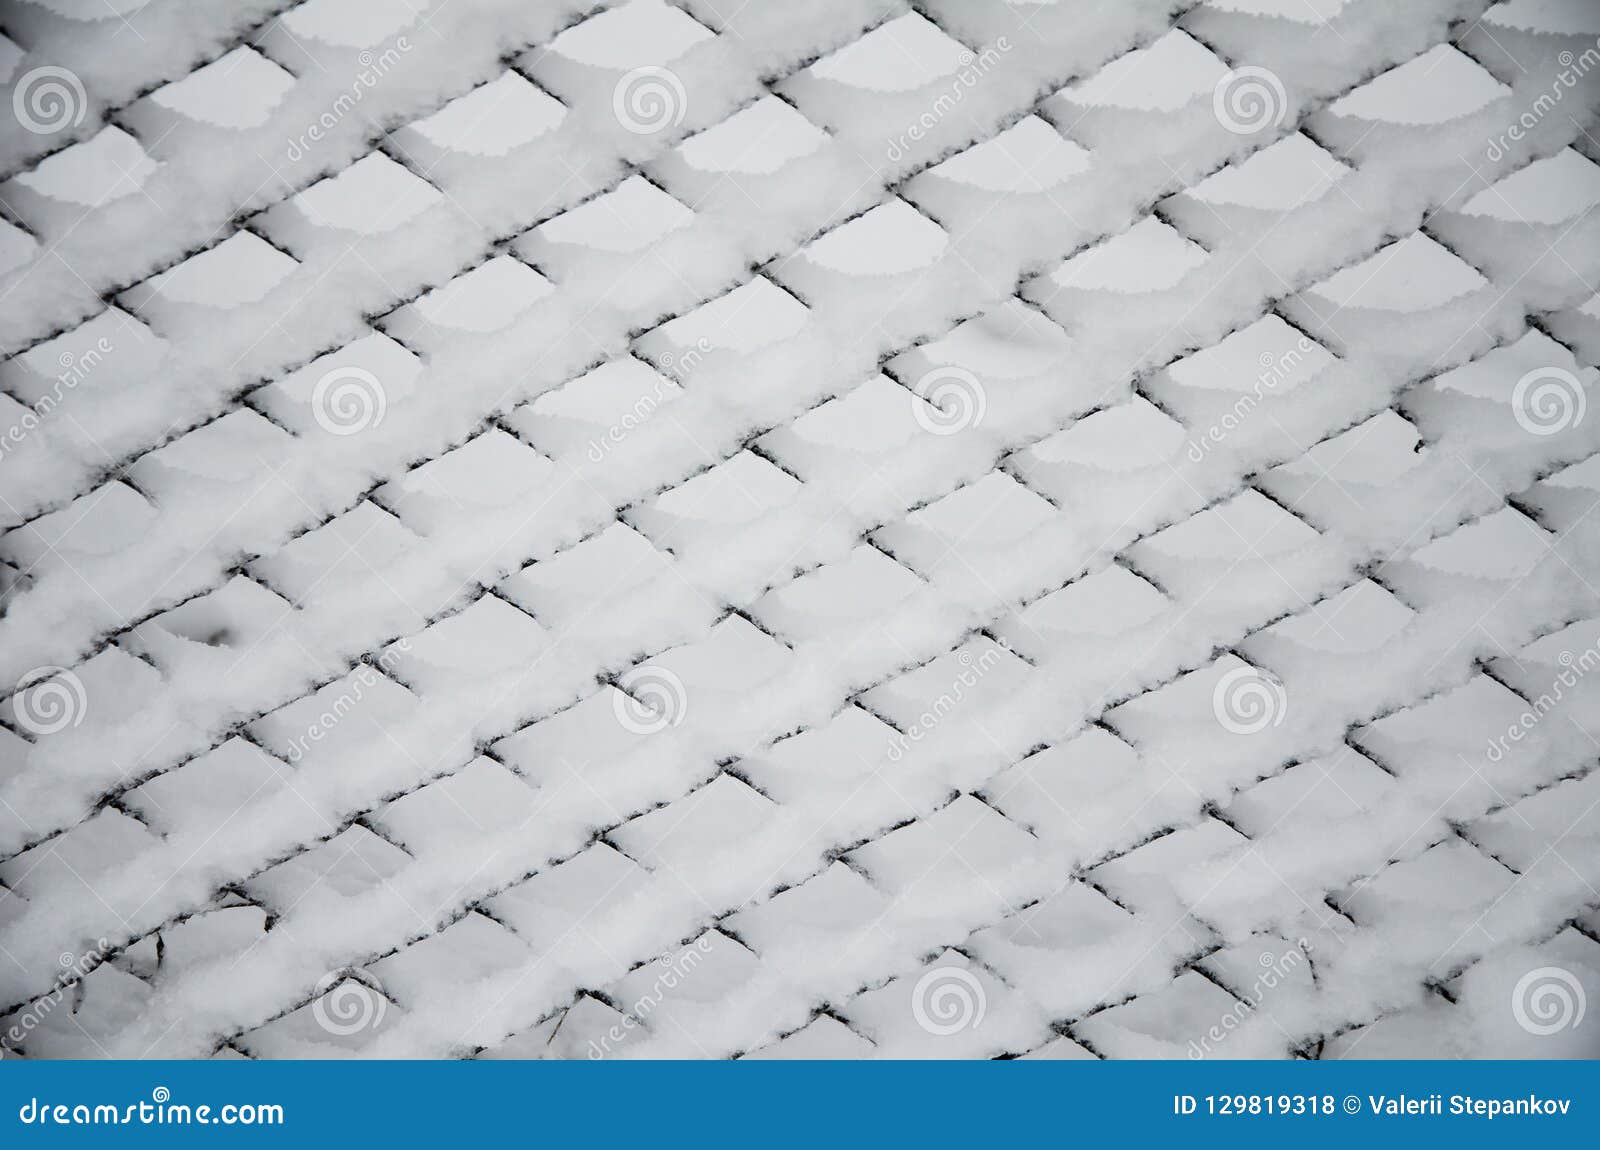 Texture Of Snow On The Fencing Net. Metal Wire Mesh Covered With Snow ...
